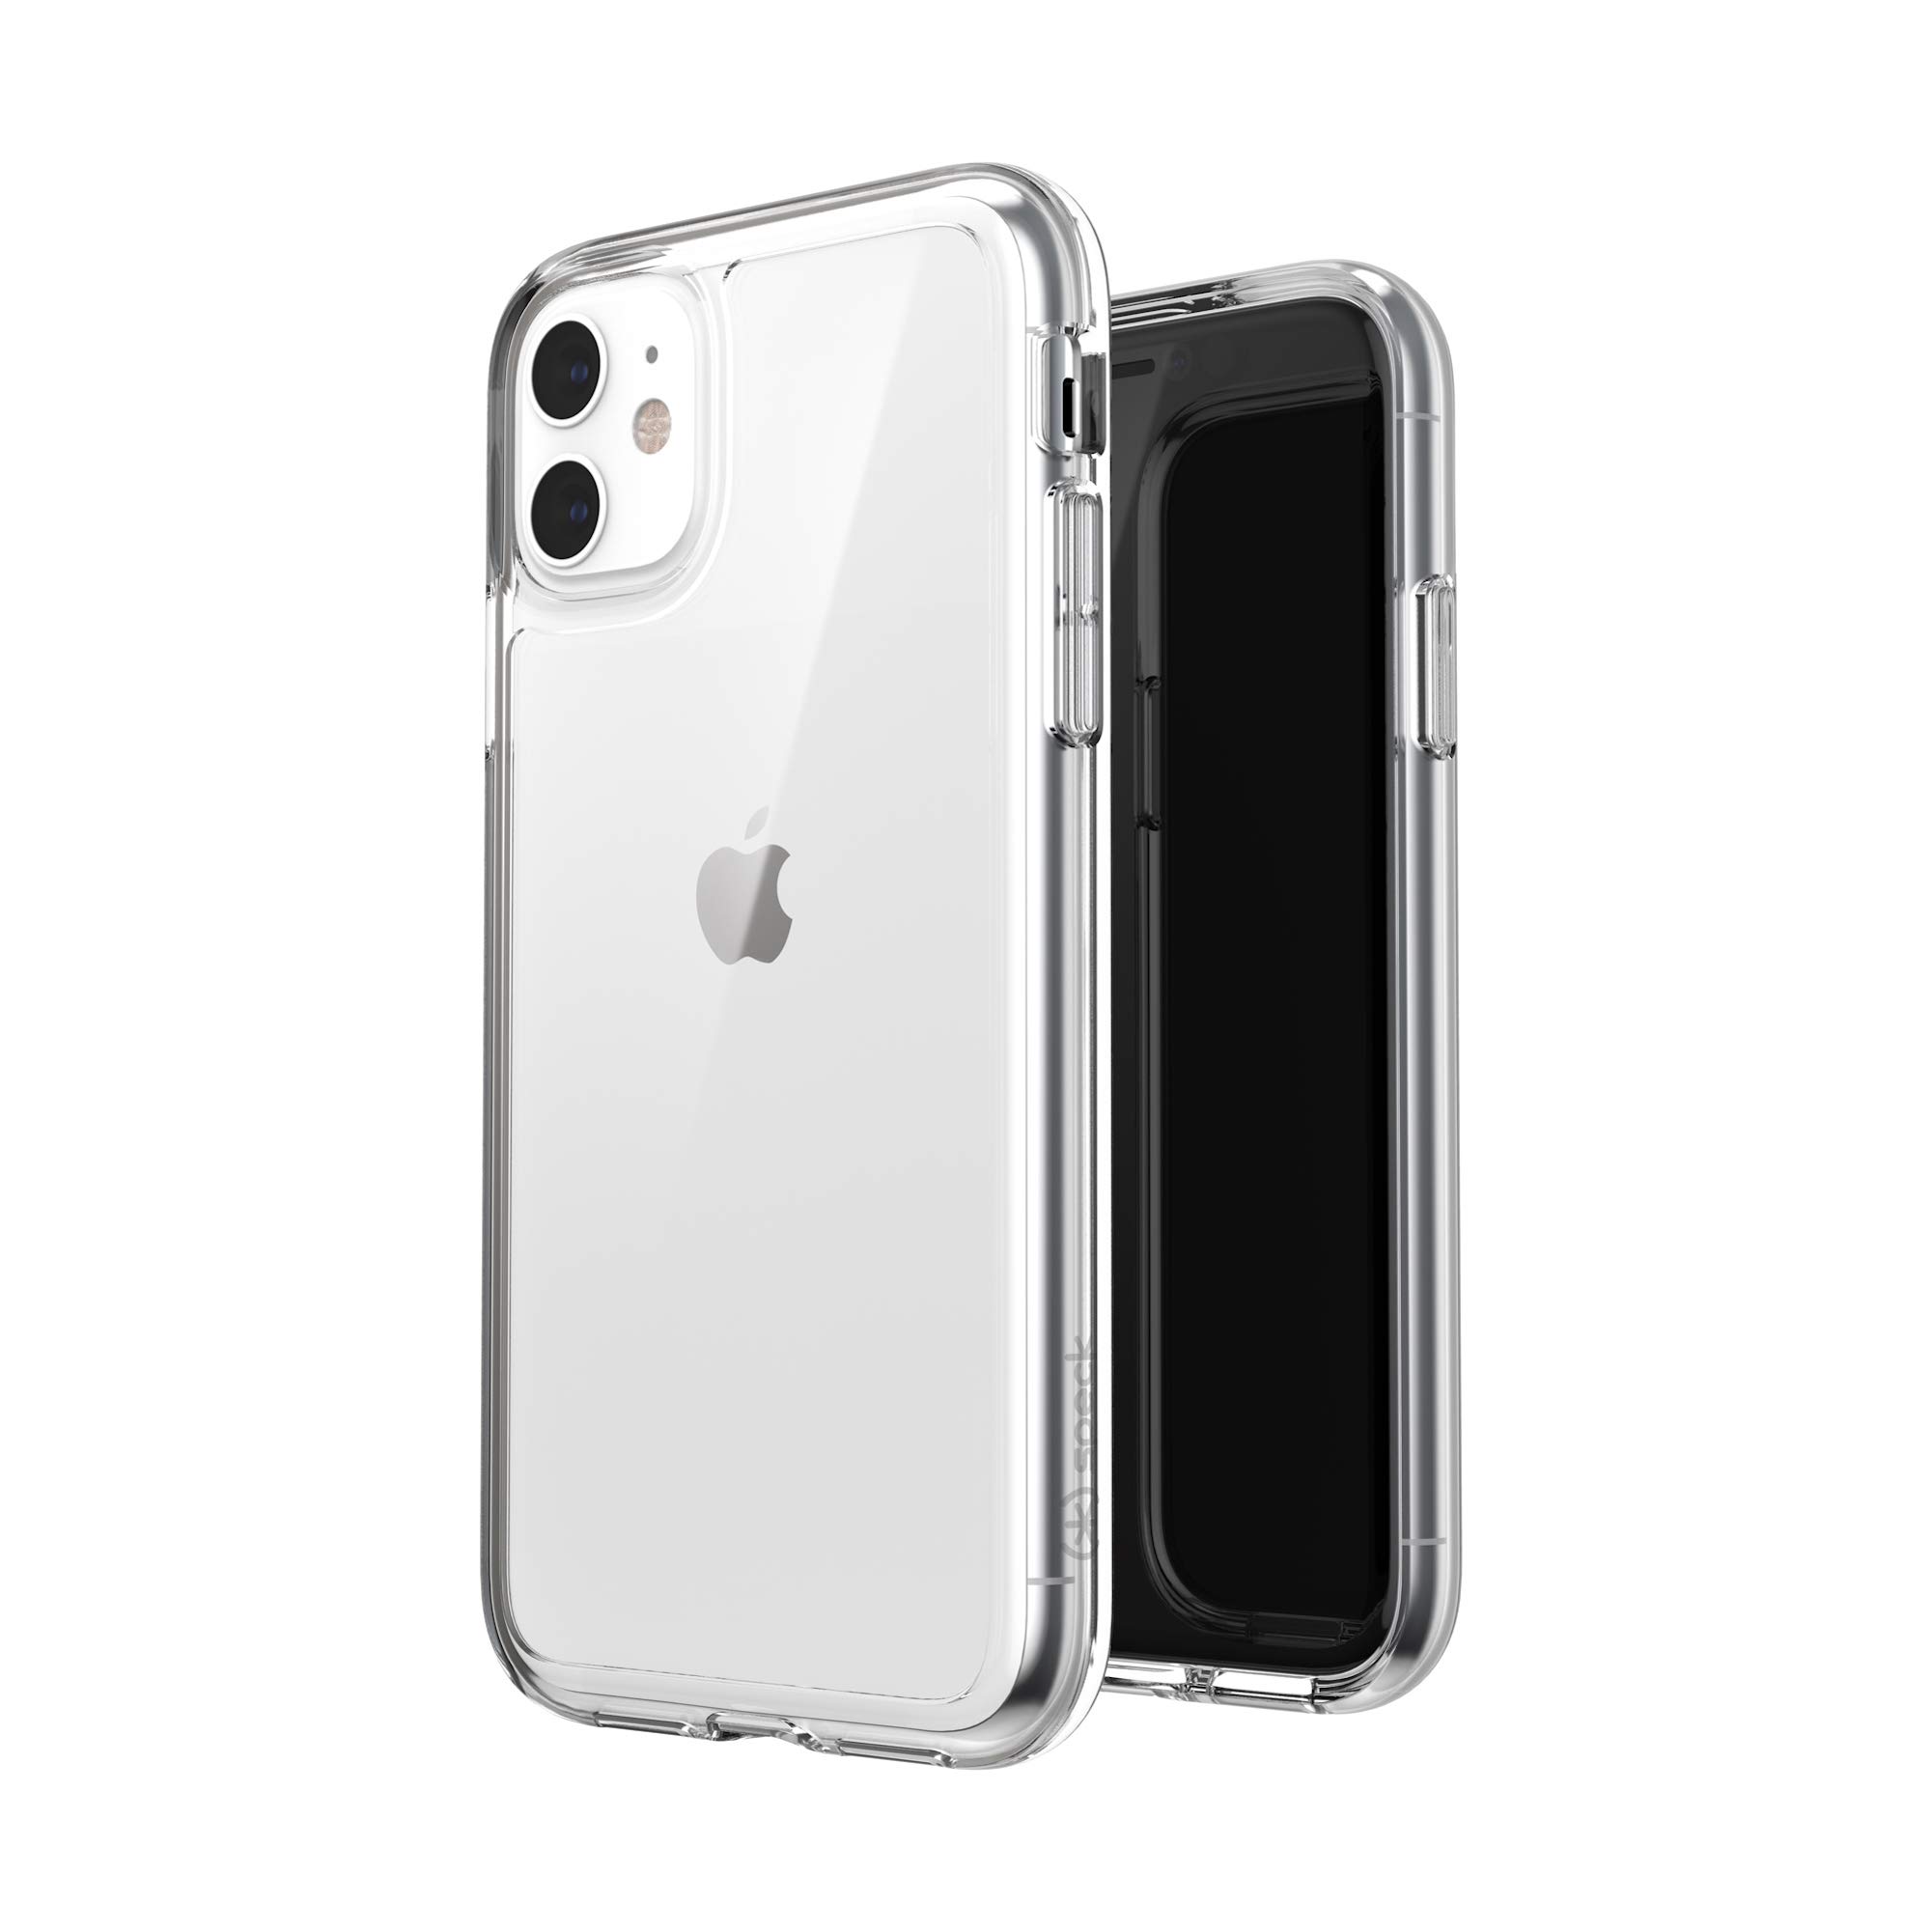 Speck iPhone 11 Clear Case - Drop Protection & Scratch Resistant, Anti-Yellowing & Anti-Fade with Dual Layer Protetective, Slim, Transparent Design - Crystal Clear iPhone 11 Cases - GemShell